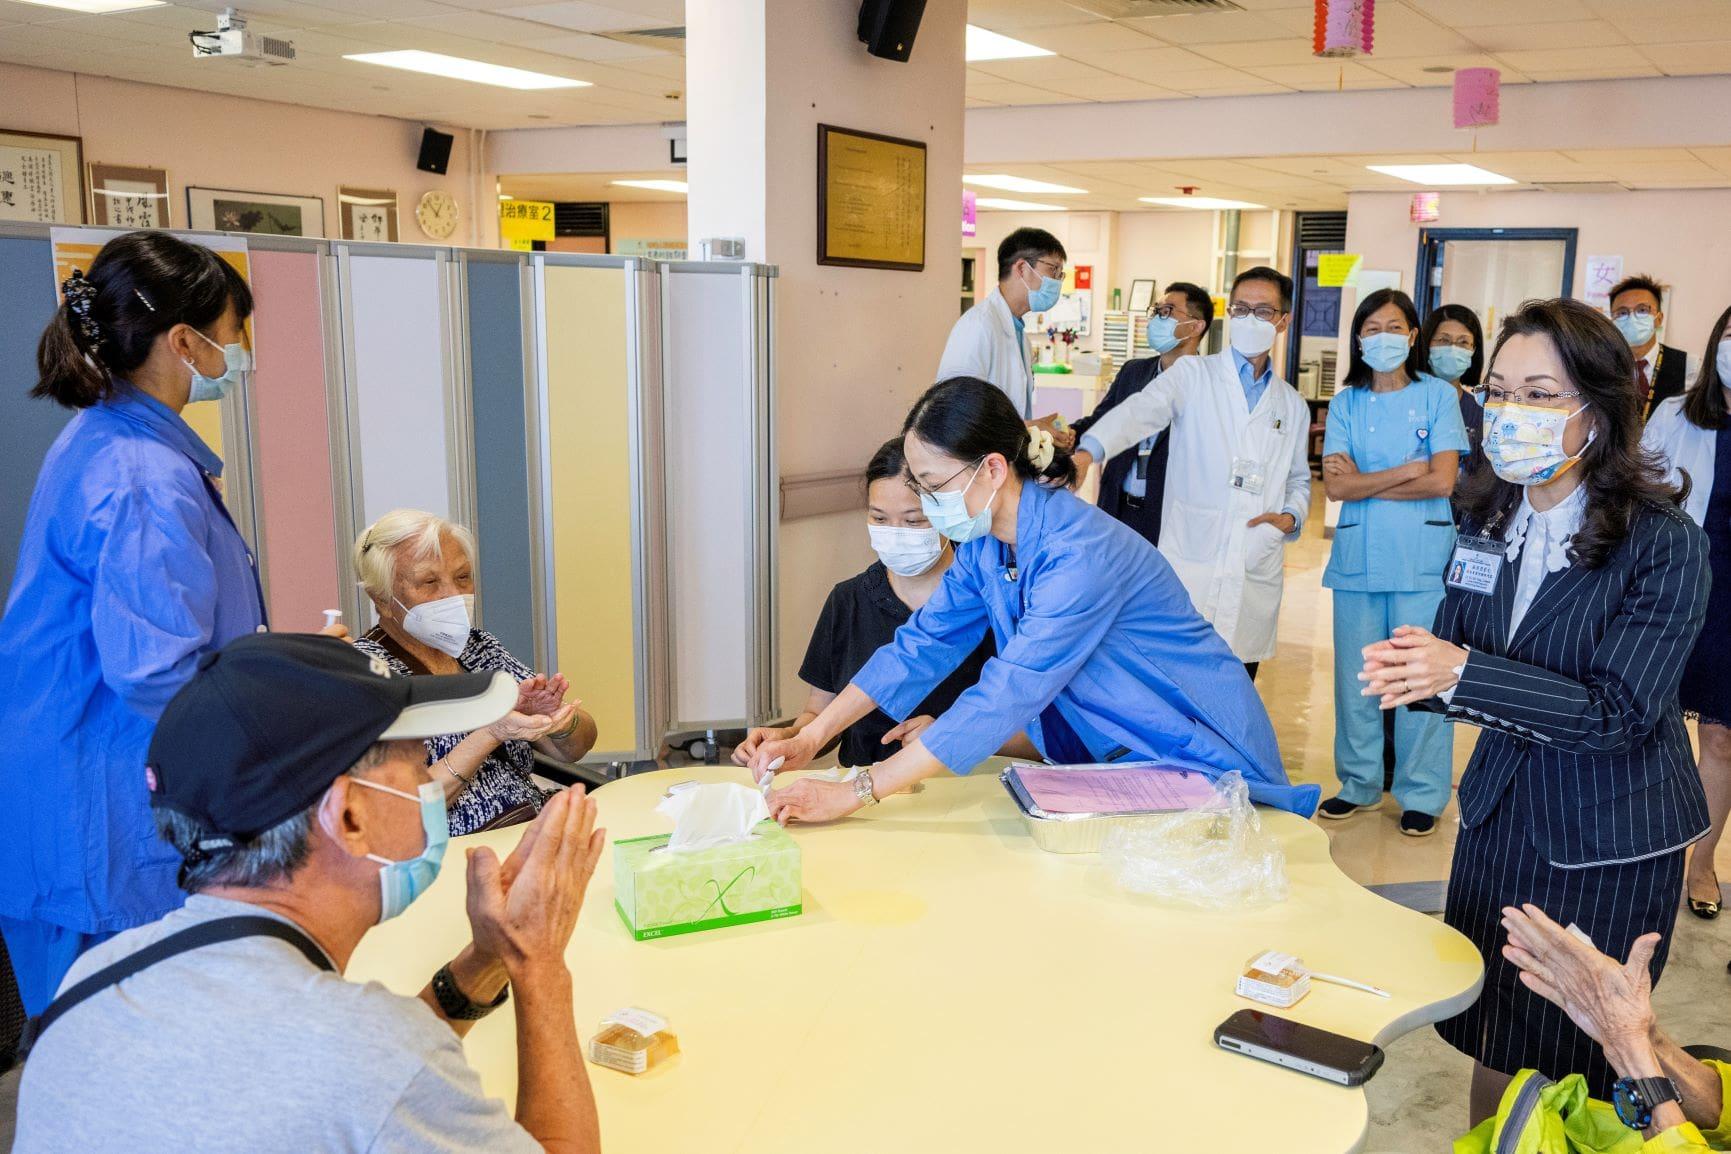 Mid-Autumn Festival celebration activities are arranged by various clusters of the Hospital Authority. As the Mid-Autumn Festival approaches, Hong Kong East Cluster staff distribute "soft mooncakes" to patients so as to share joy and help create a festive atmosphere.